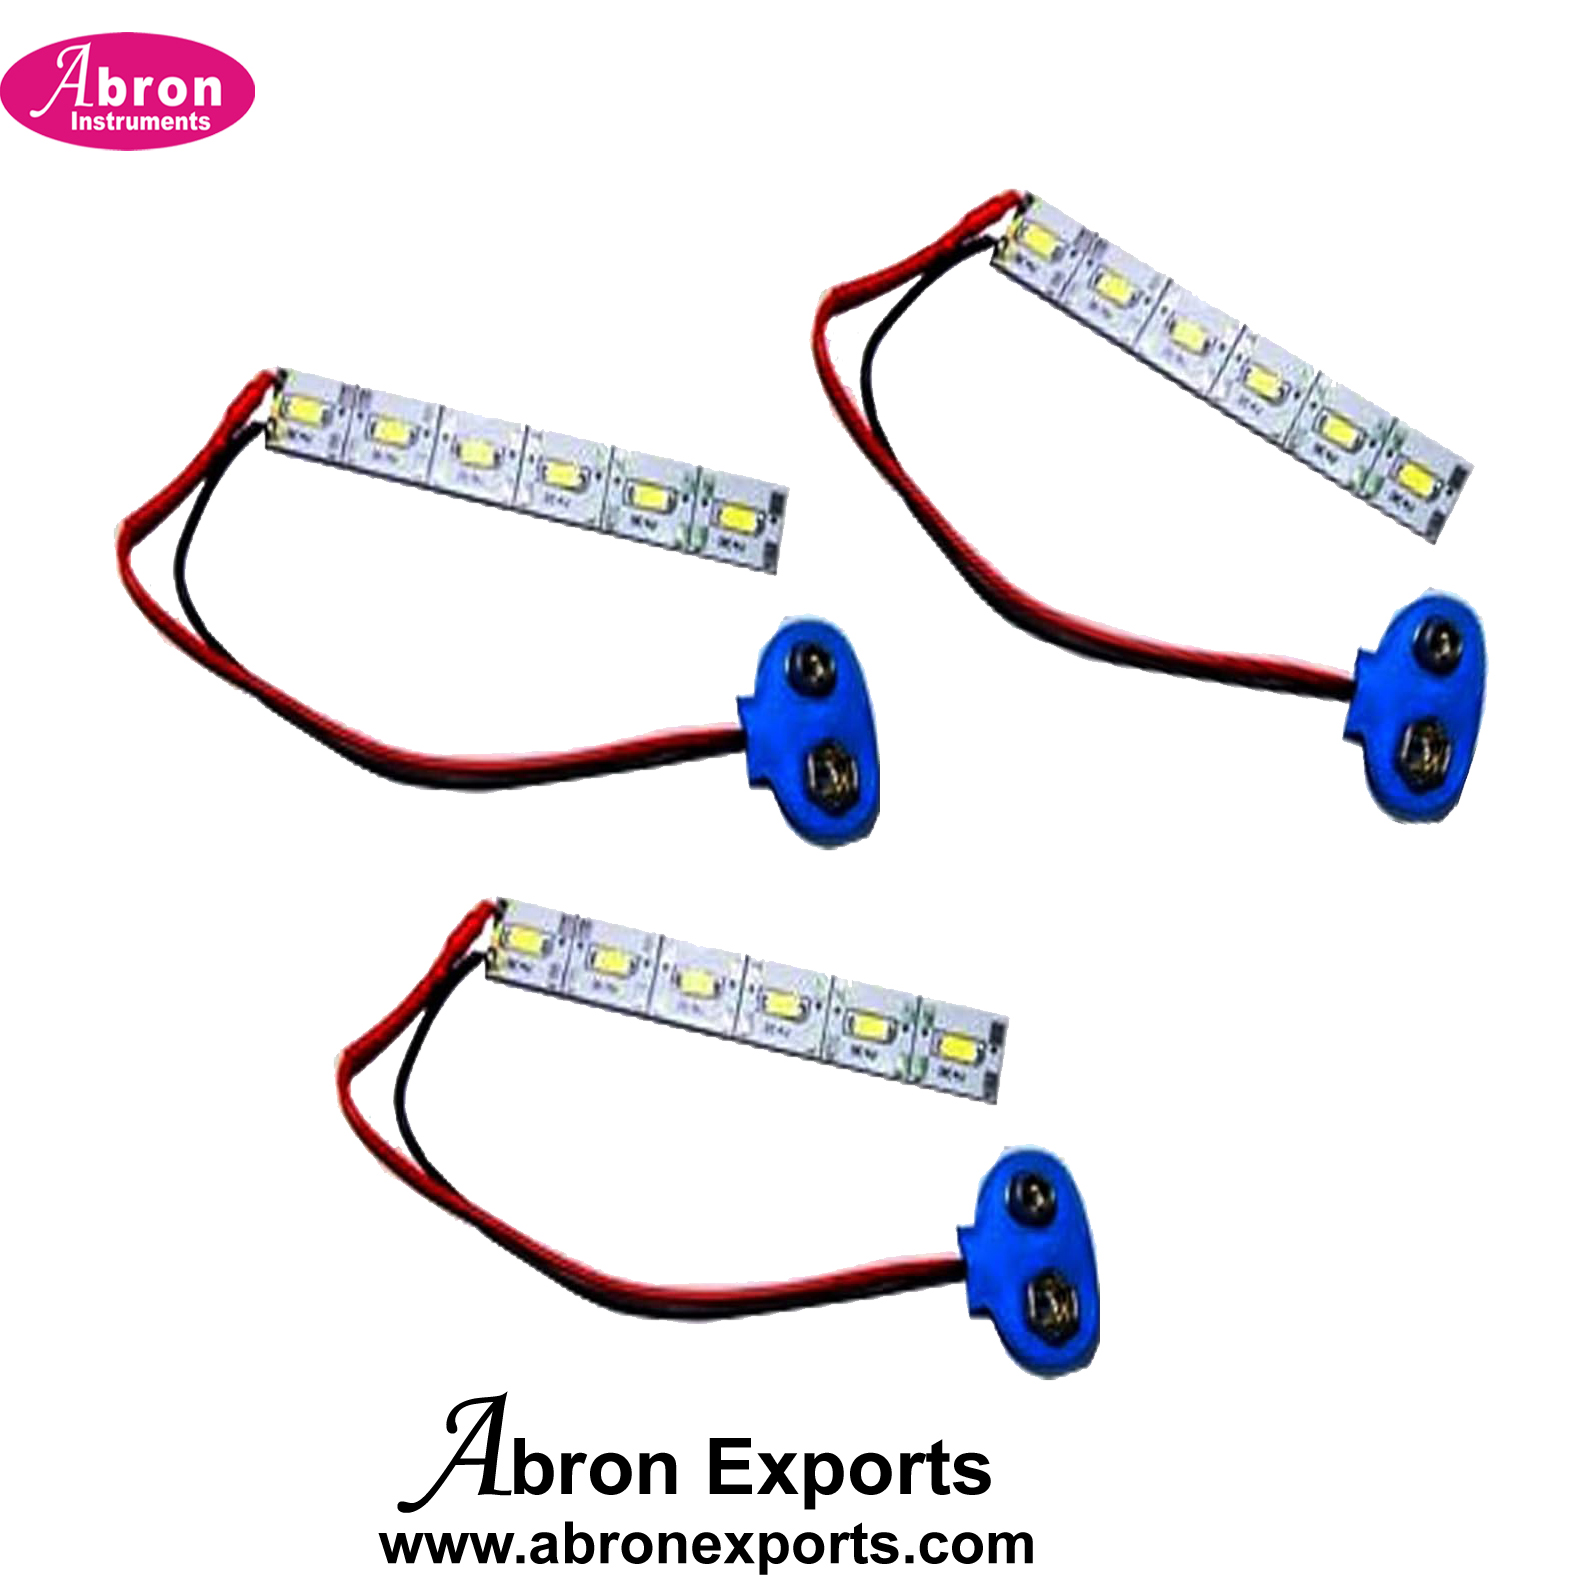 Electronic Component loose spare LED Lamp spare 9 Volt 5 Watt DC SMD Strip Module Multipurpose Use DIY pack of 3 Abron AE-1224LS9V6 